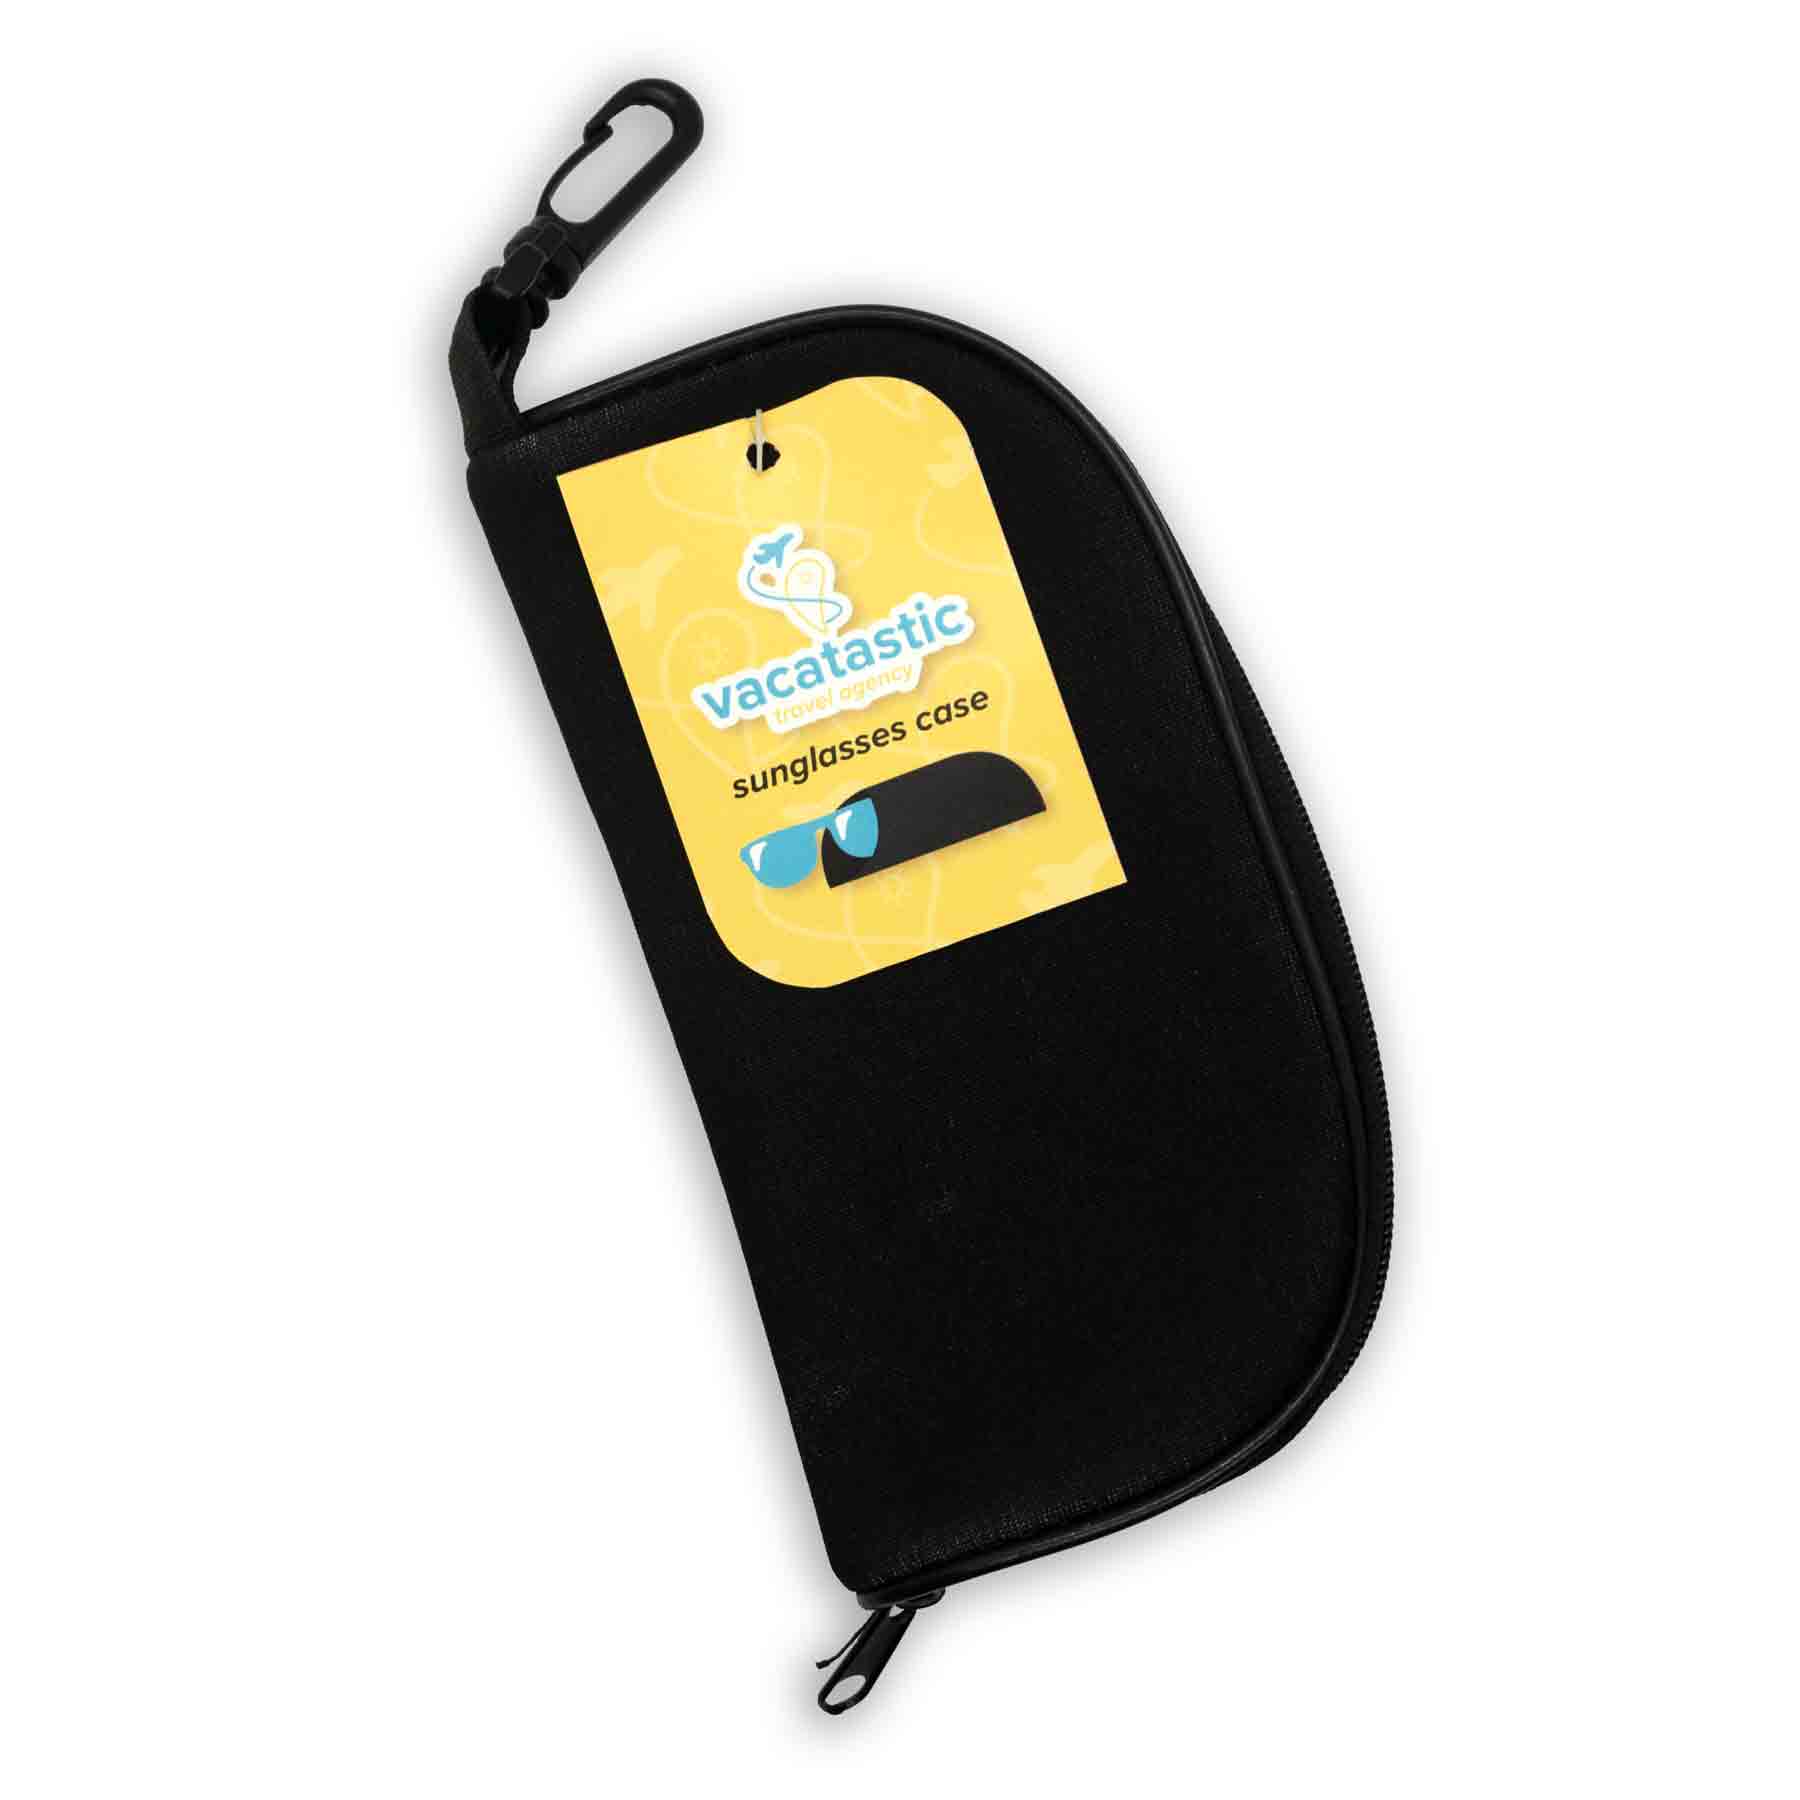 black sunglasses case with a yellow vacatastic tag